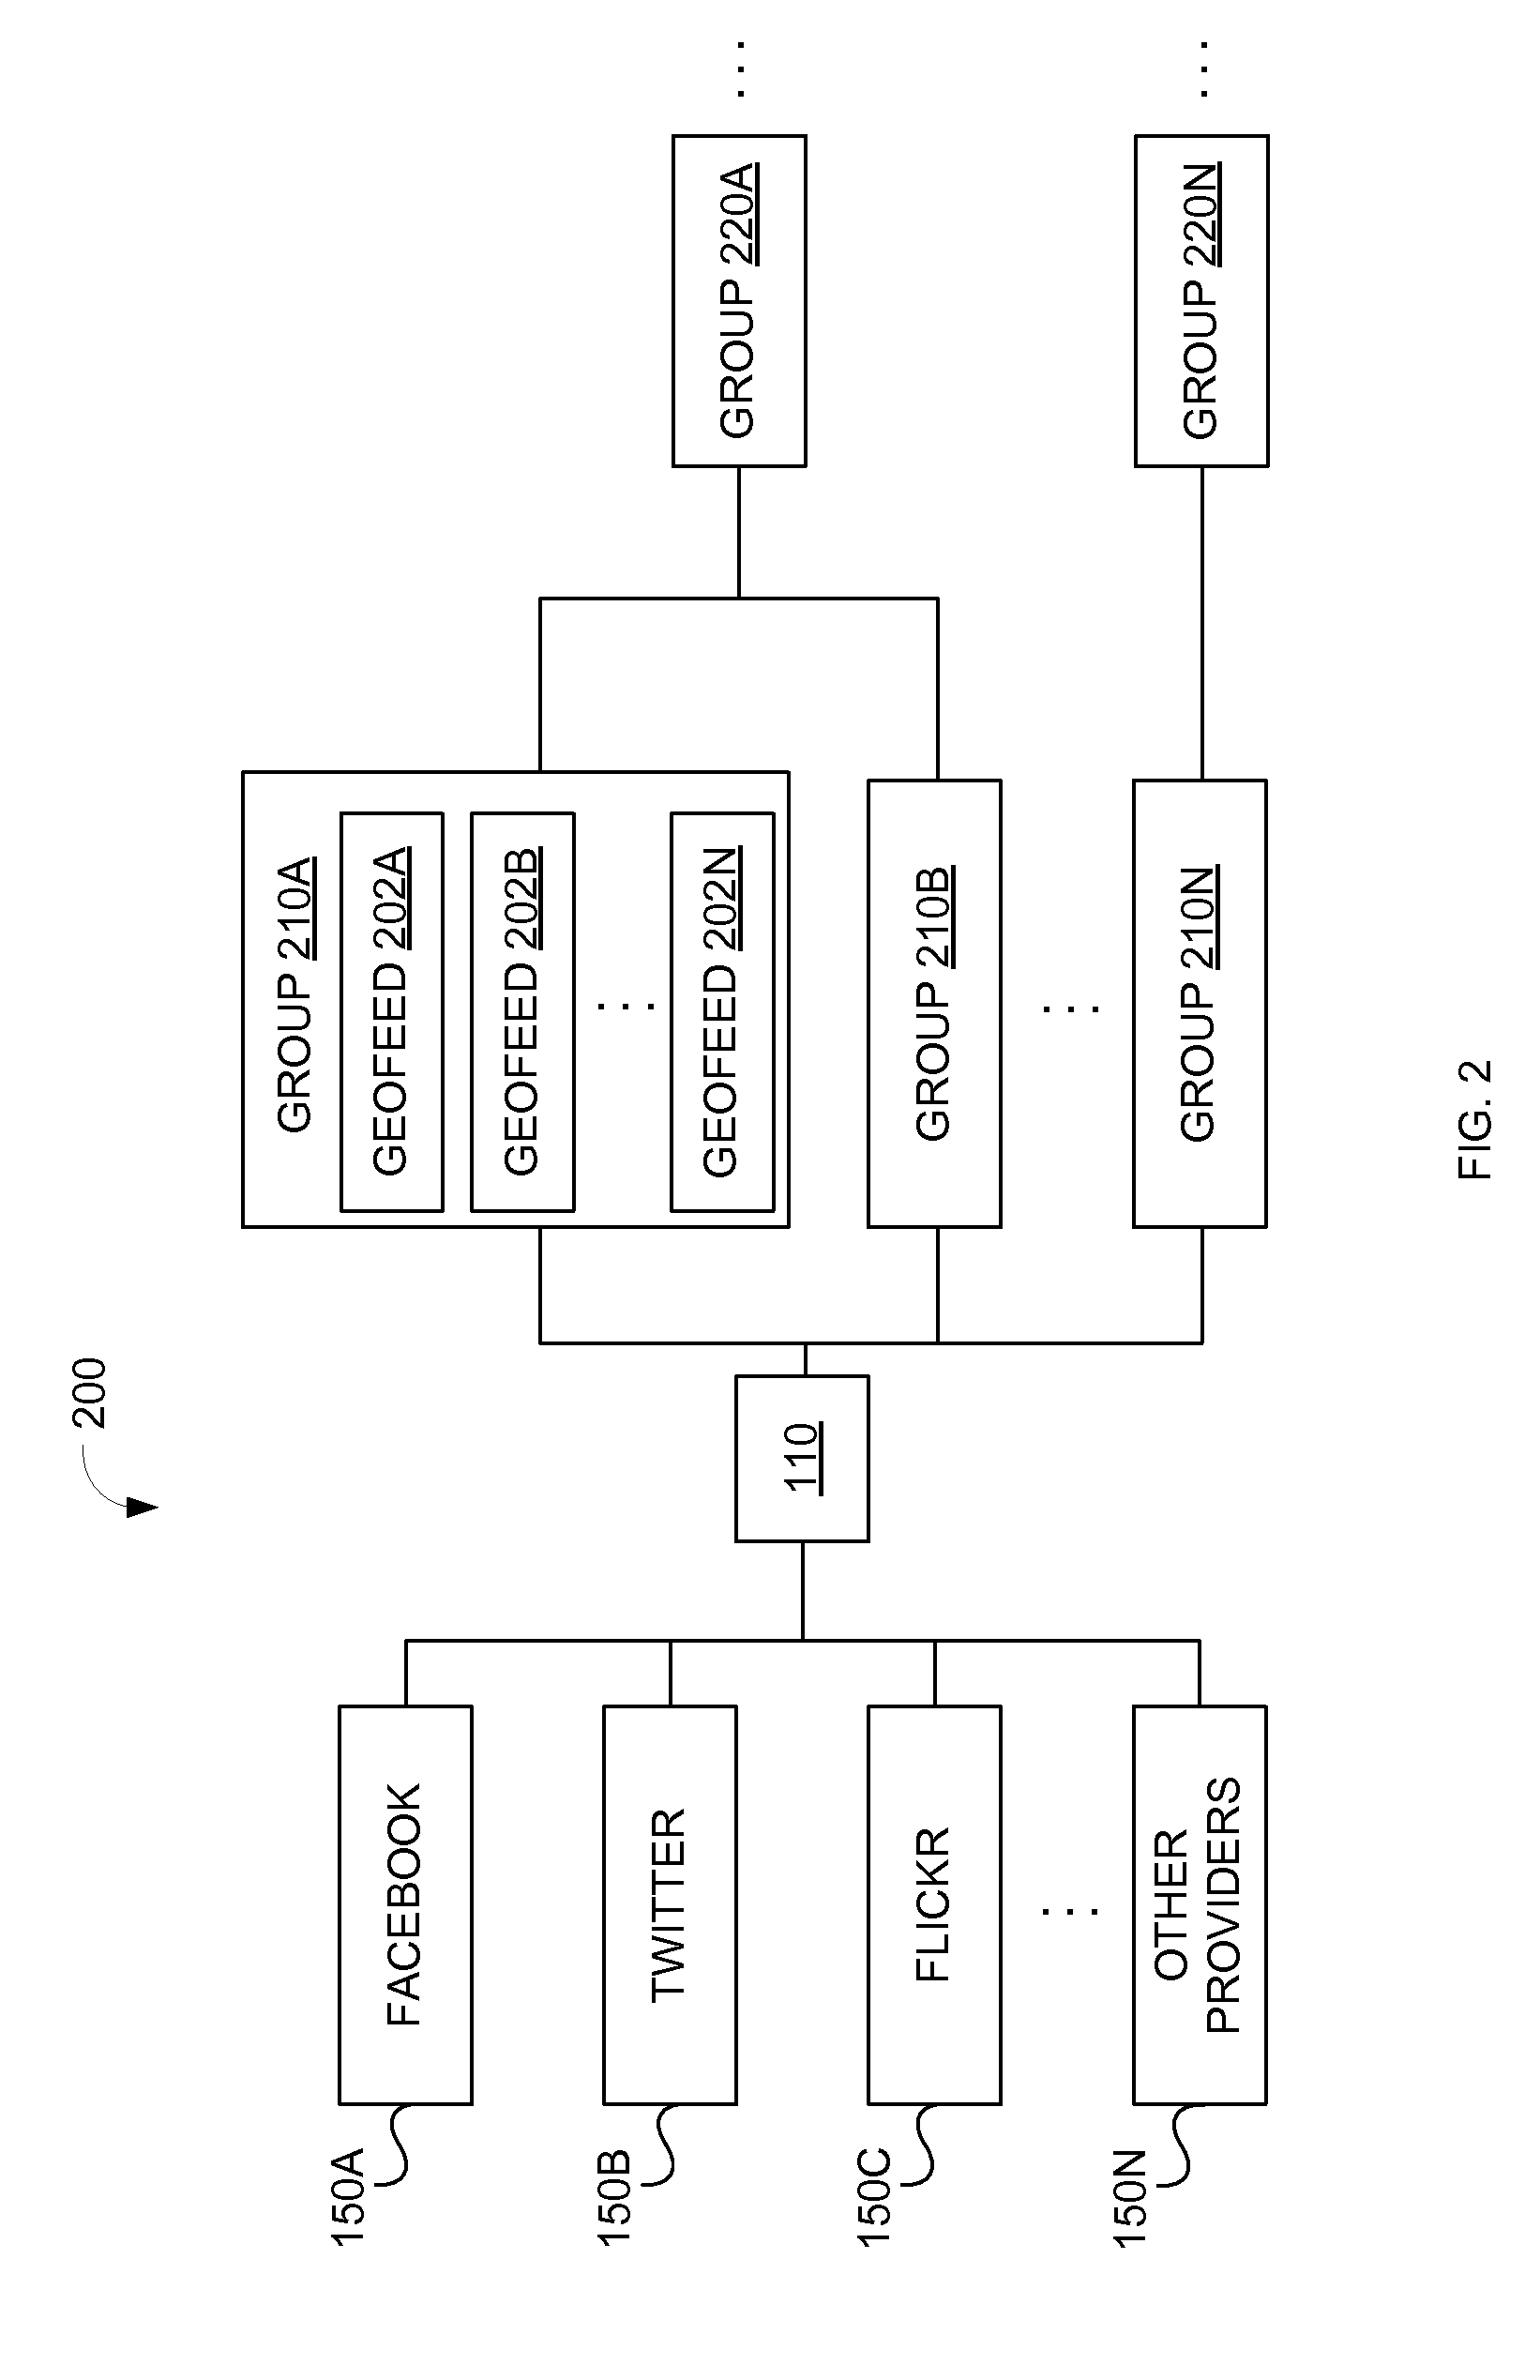 System and method for location monitoring based on organized geofeeds